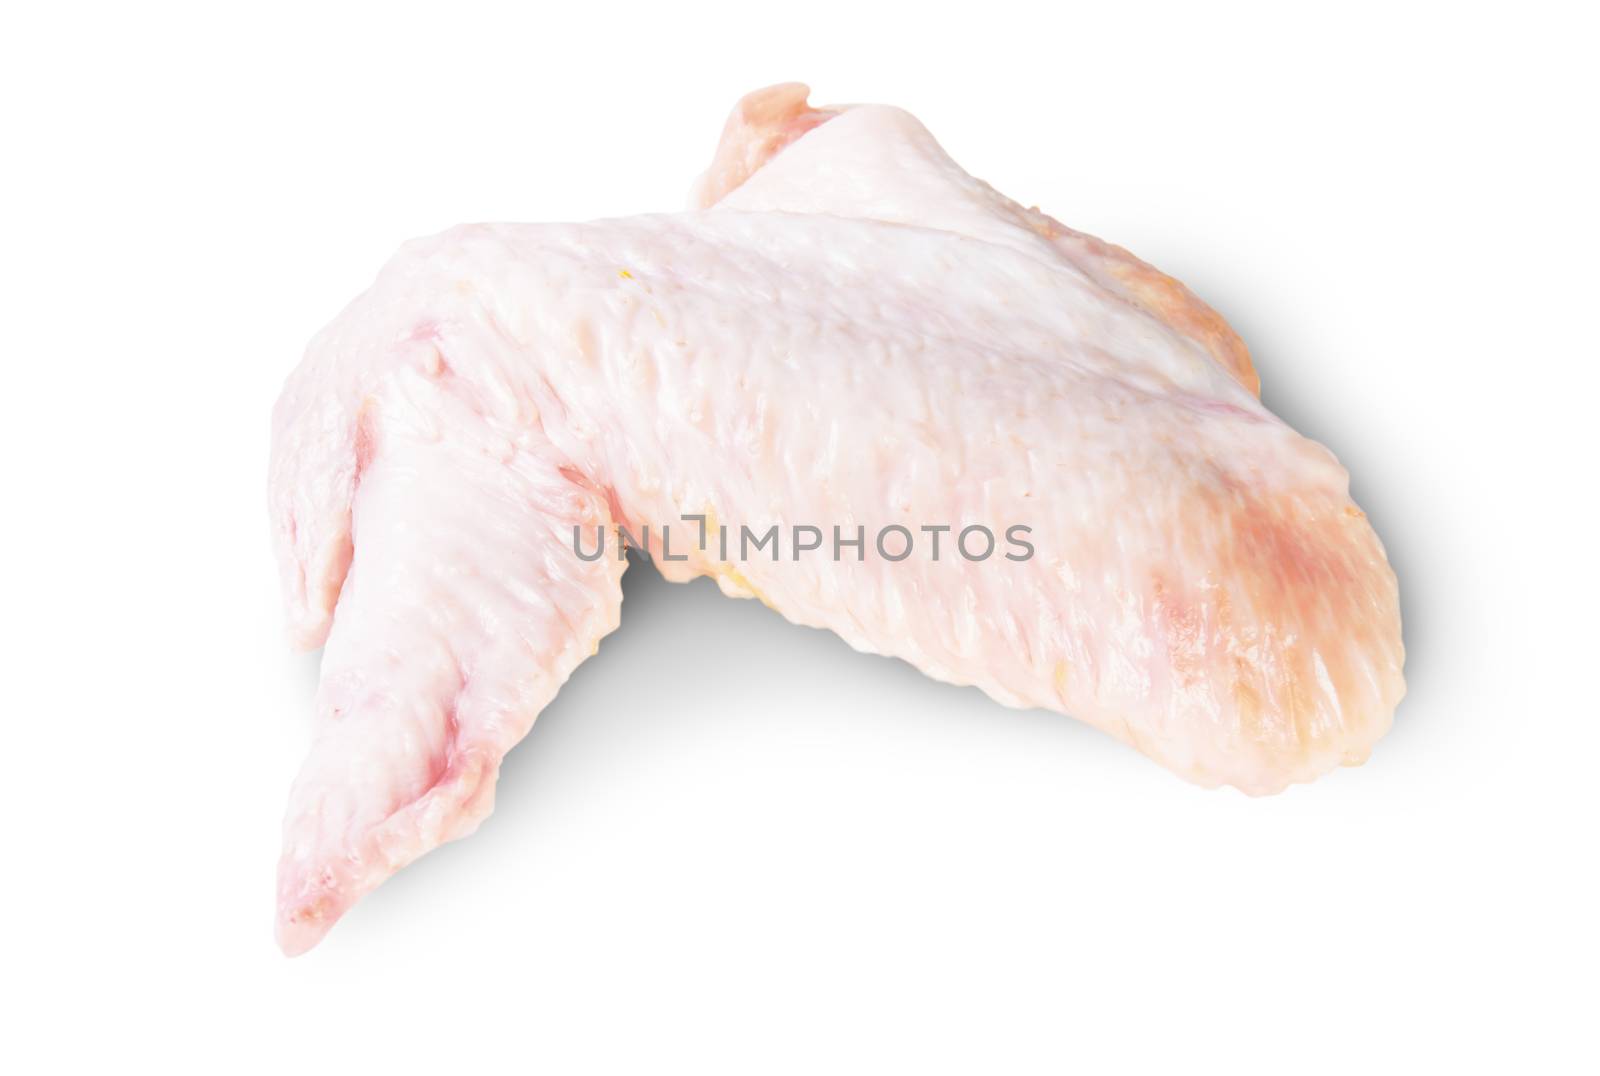 Raw Chicken Wing Isolated On White Background